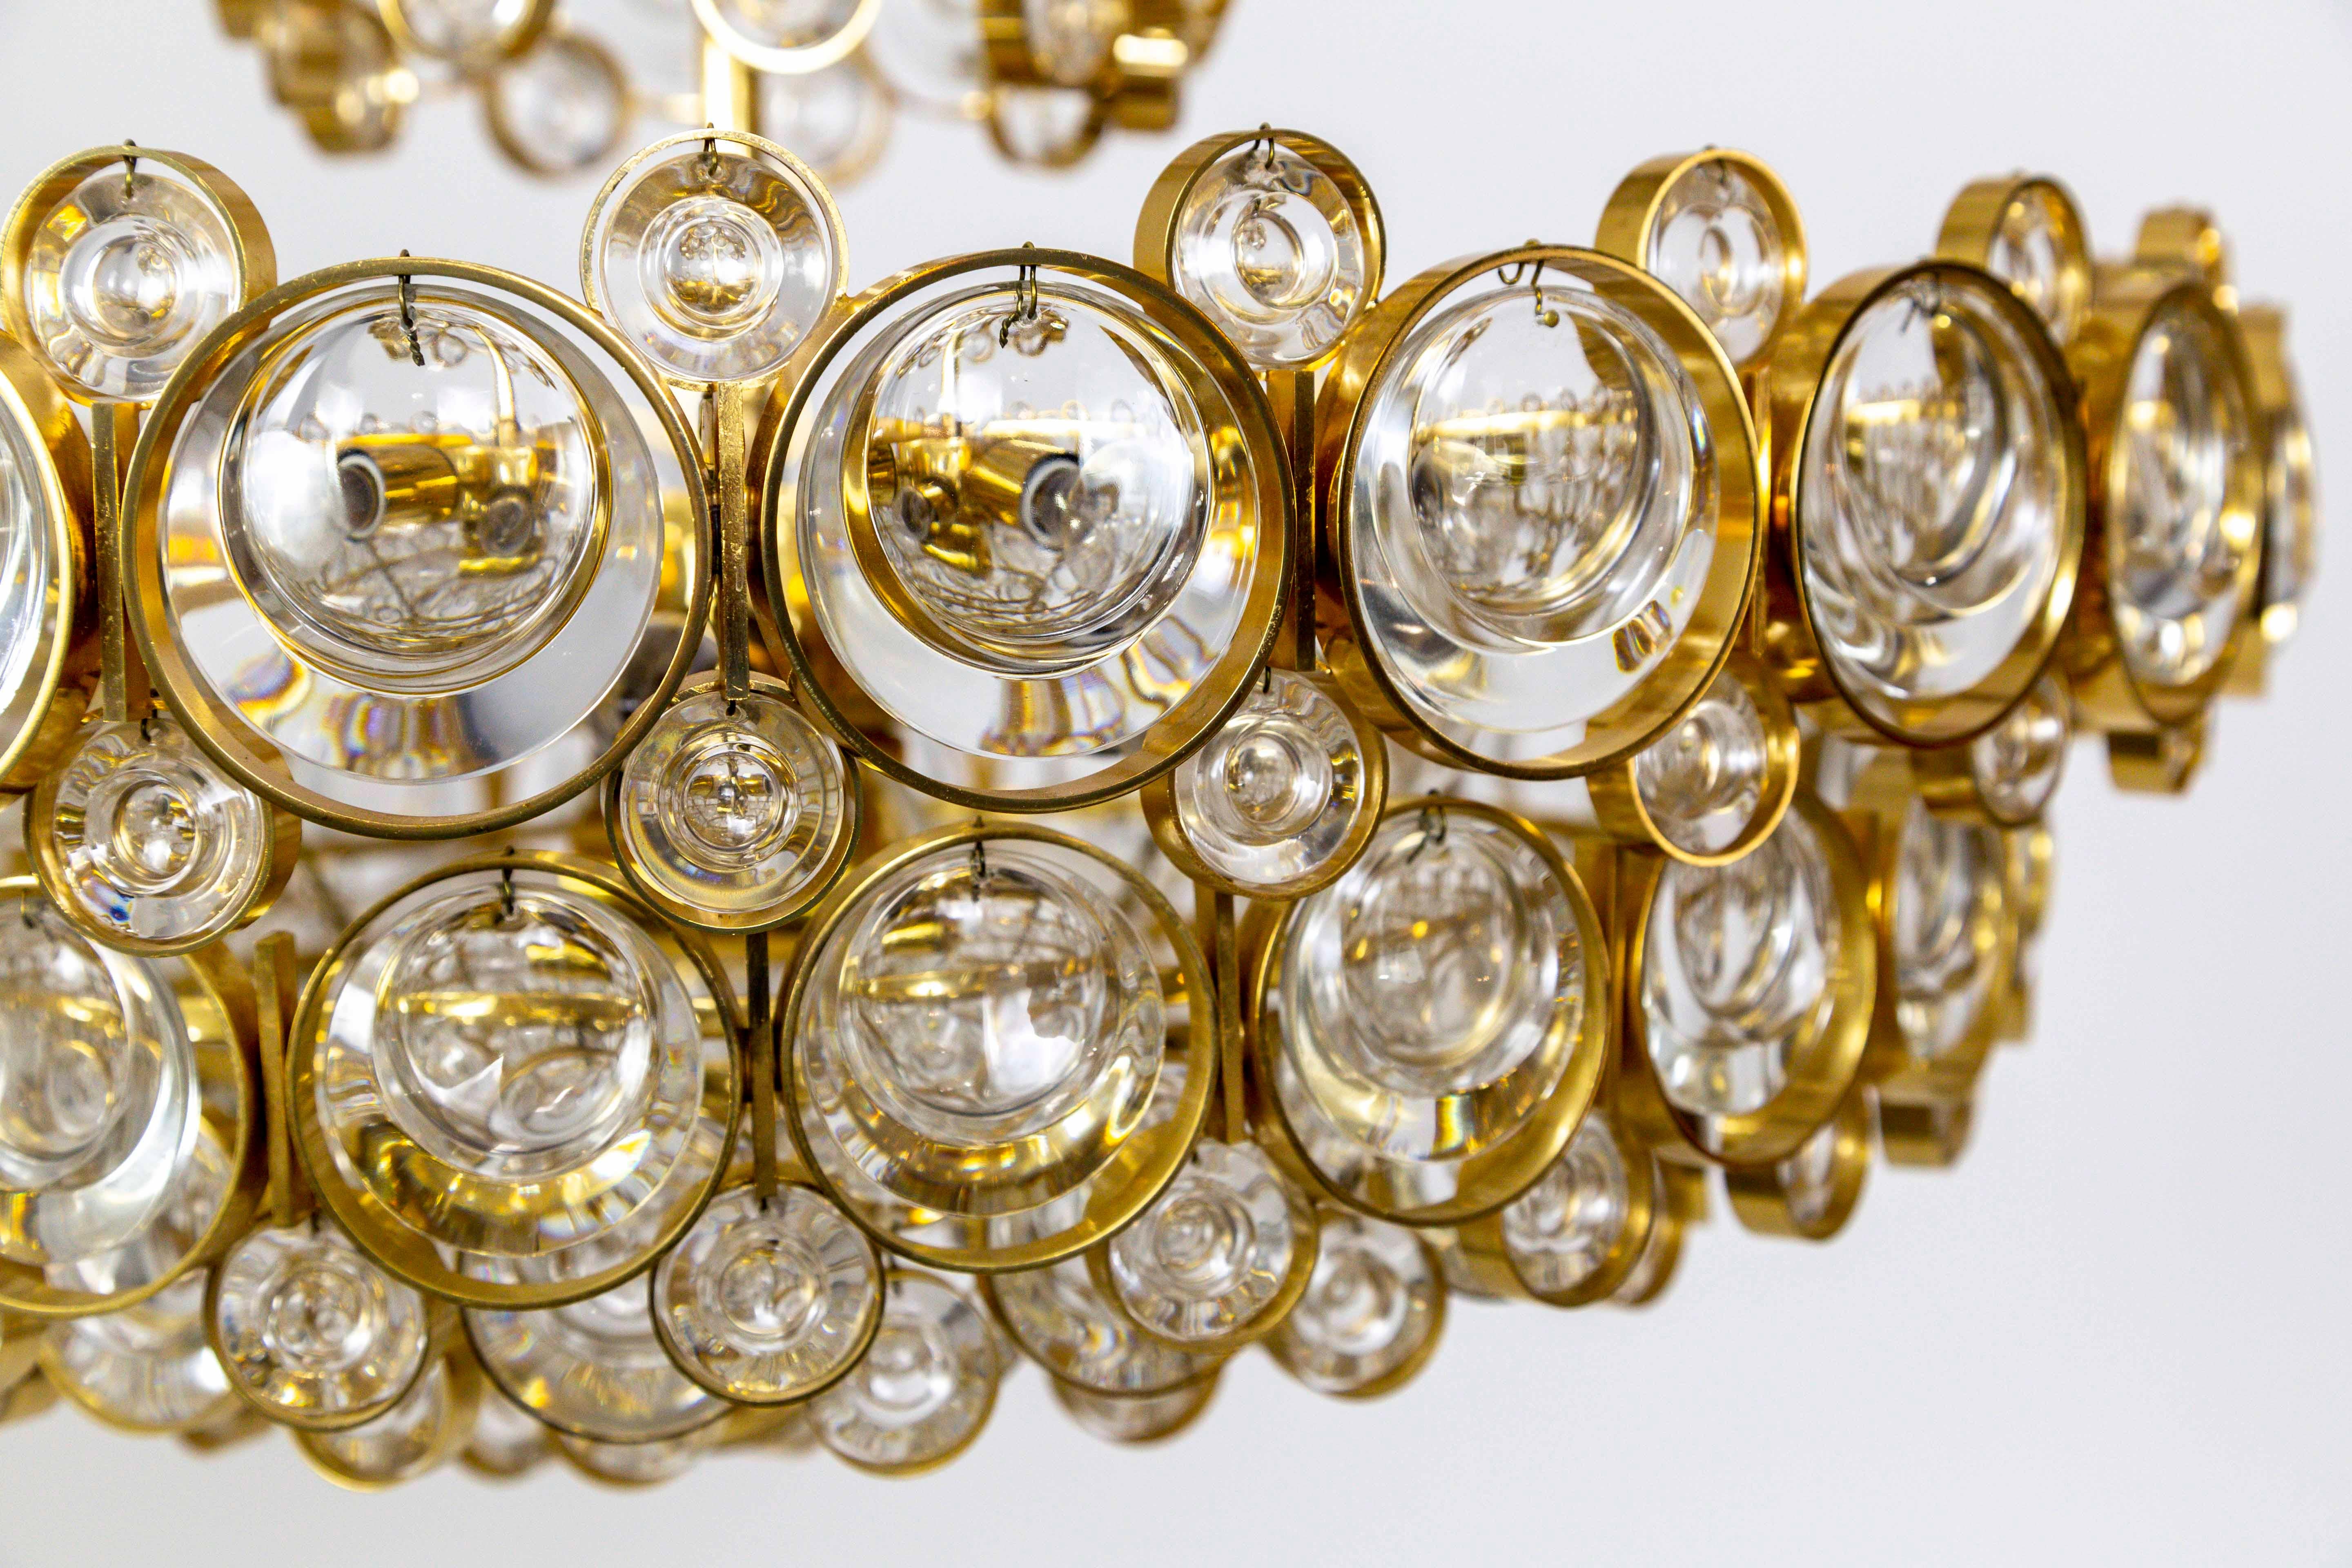 A Mid-Century Modern Palwa chandelier with a complex, multi tier design with 11 lights; a gilded brass, circular structure comprised of small and large rings with dangling optical glass lens crystals inside. 5 candelabra and 6 medium base, porcelain